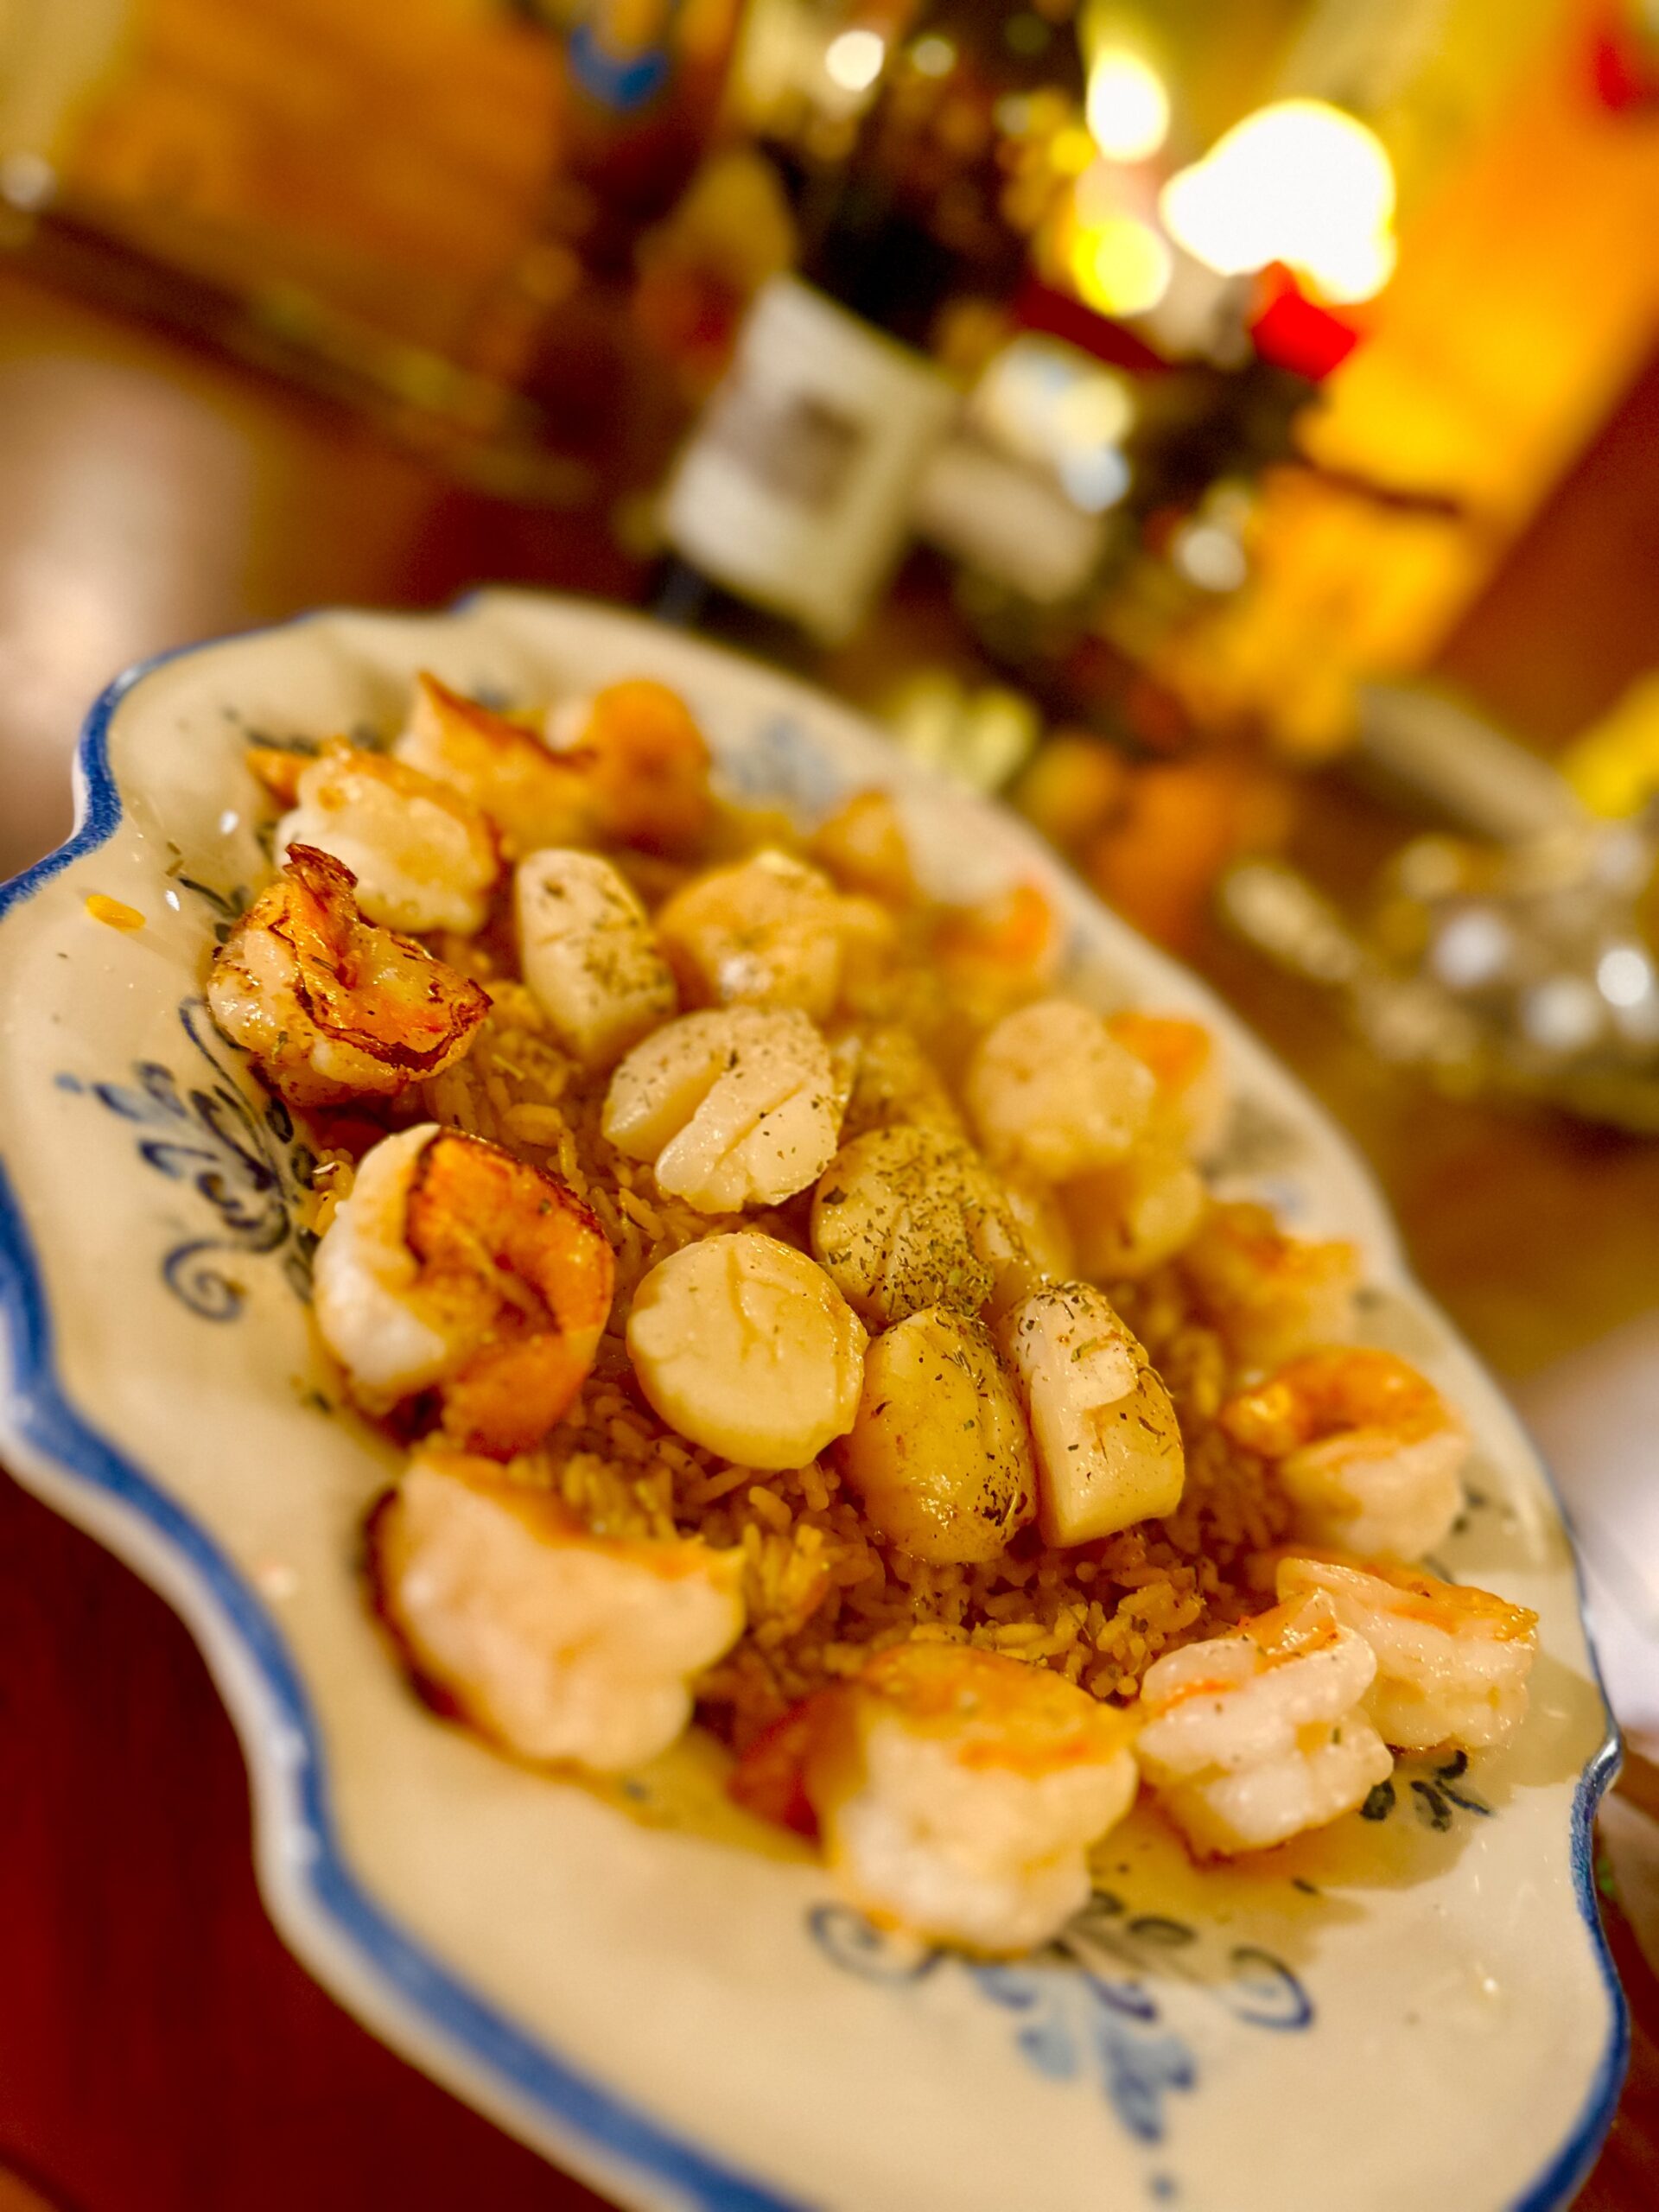 Succulent, Tender Scallops and Shrimp on Herbed Rice!